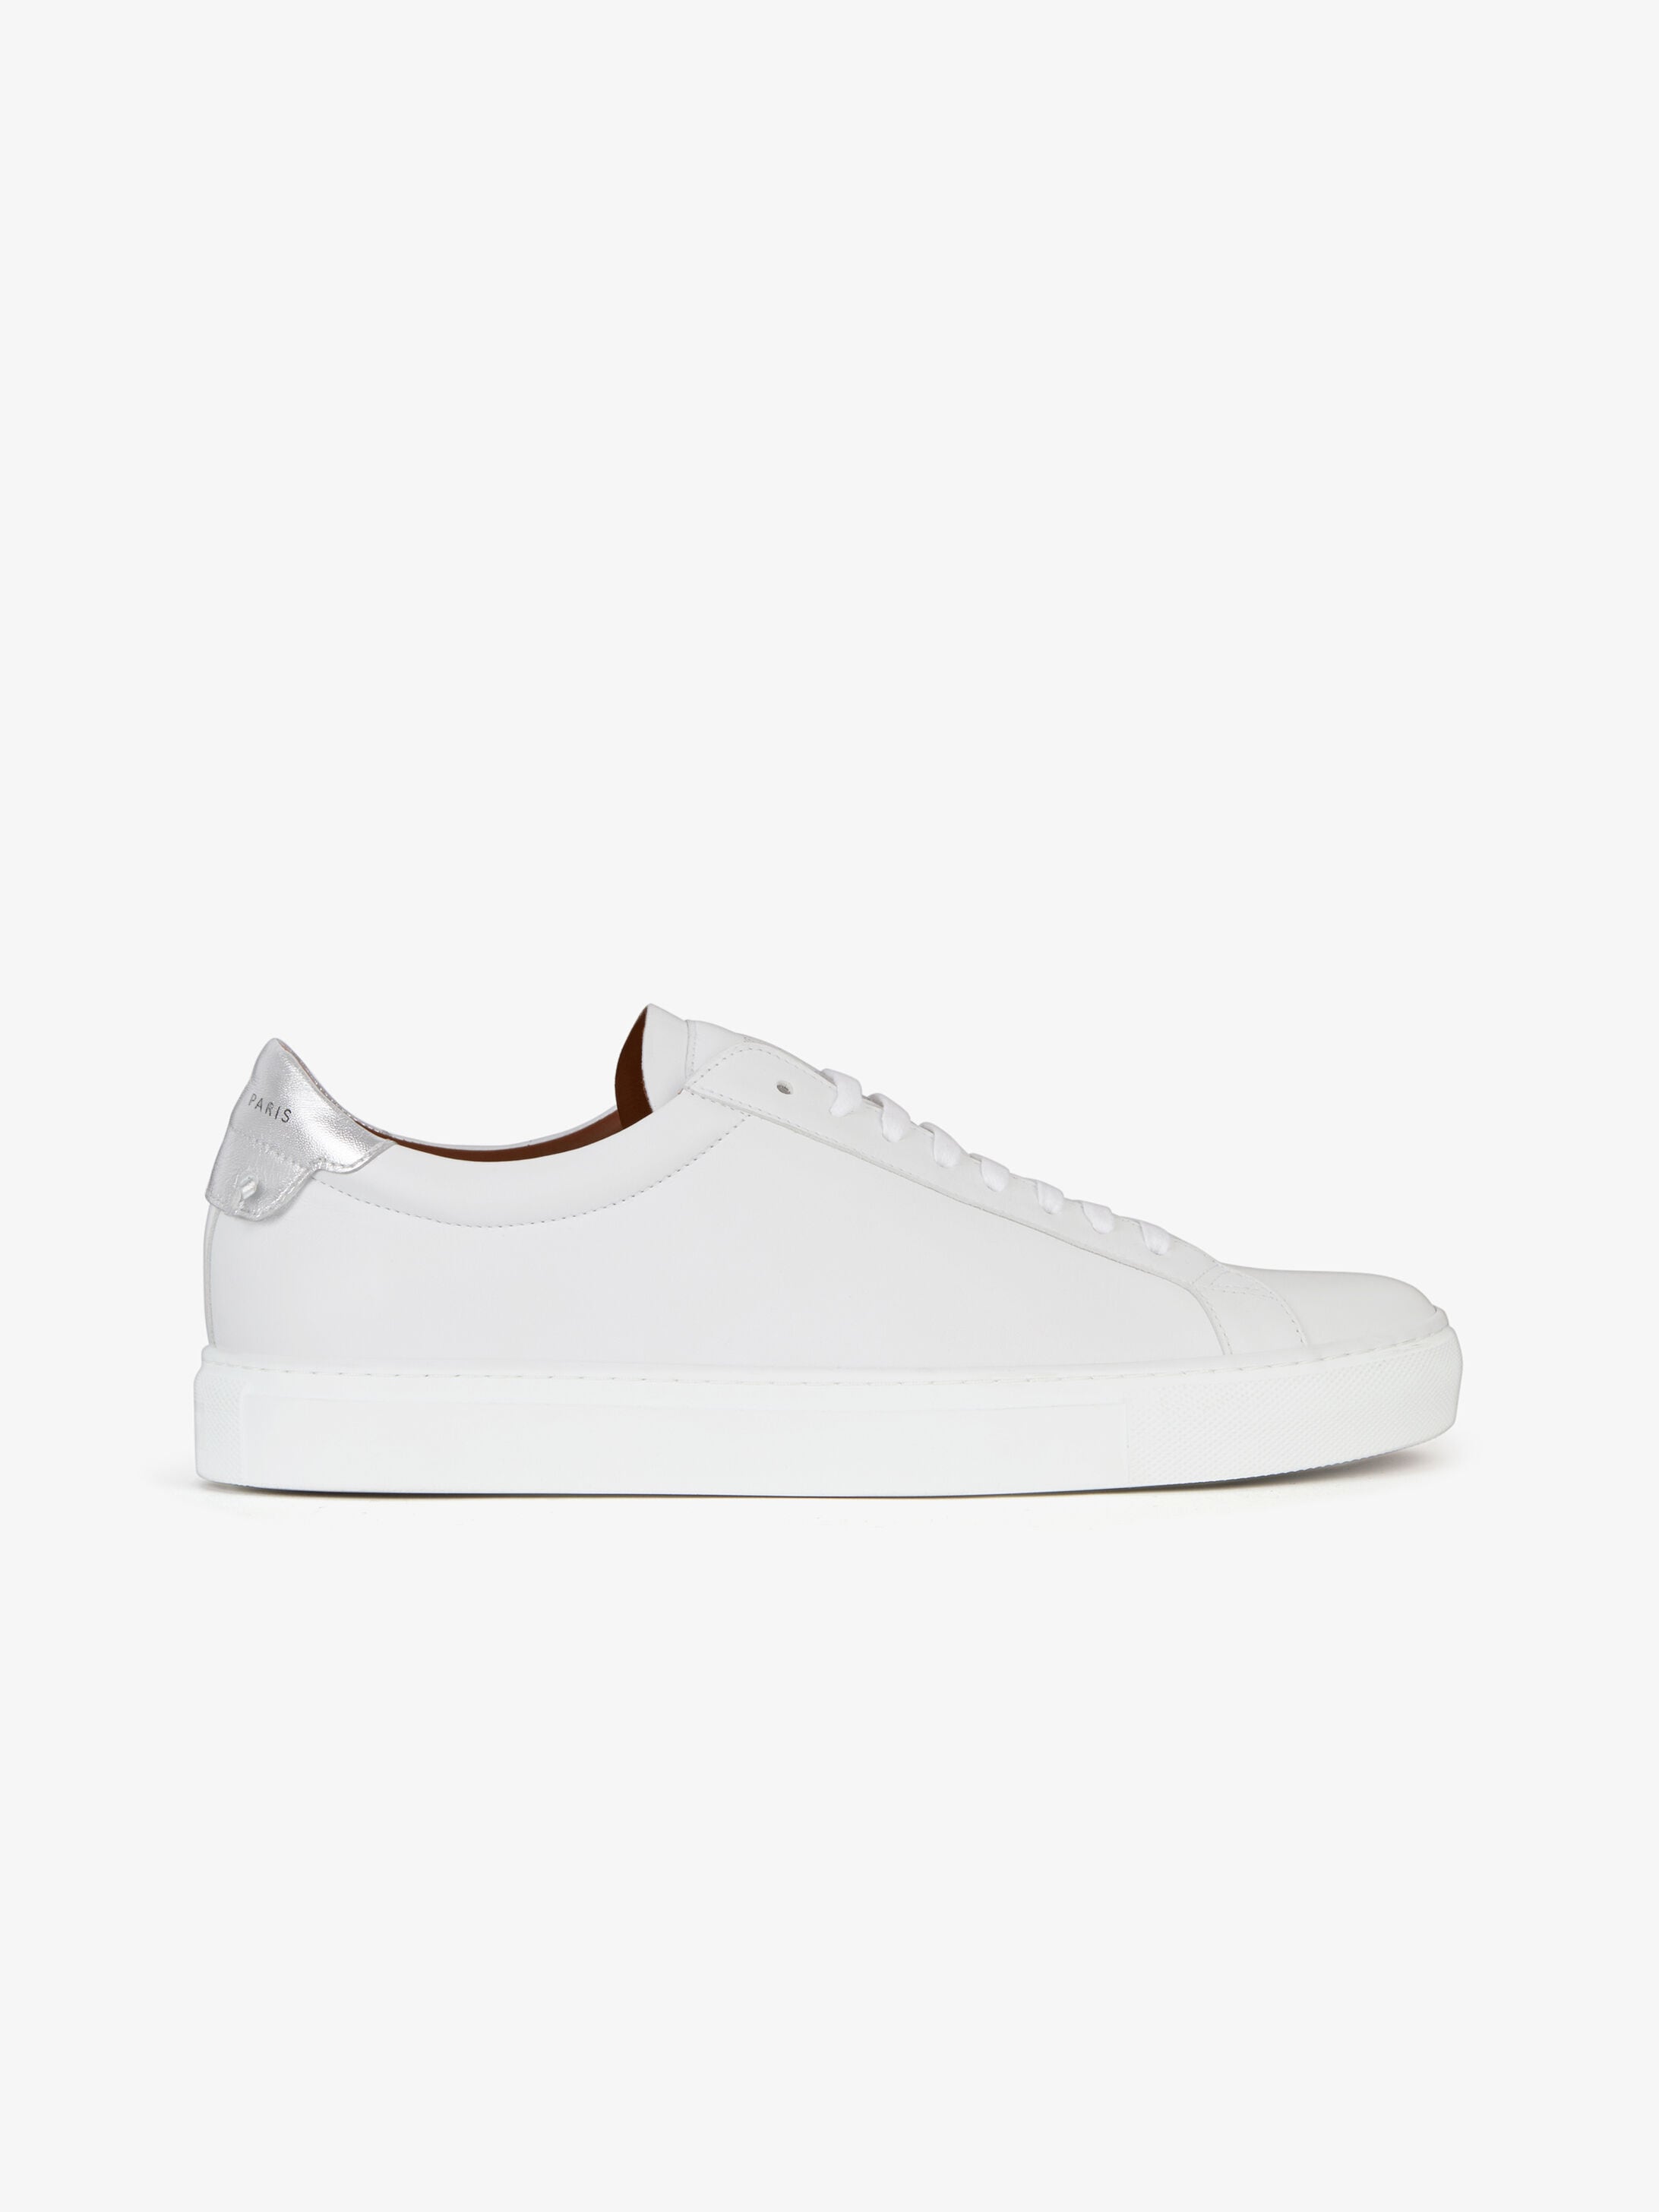 givenchy men's urban street leather sneakers